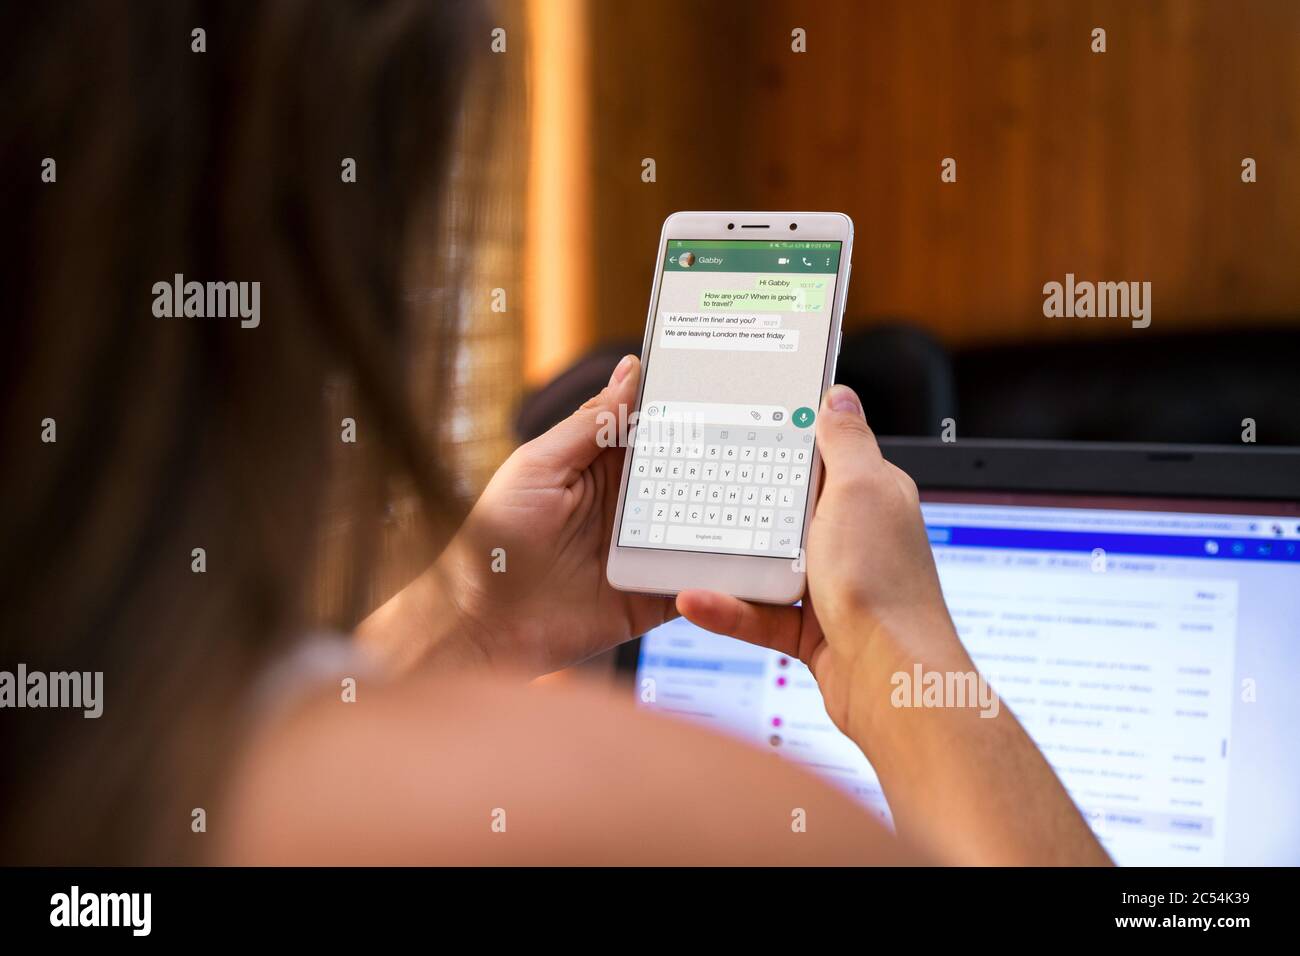 Girl chating through whatsapp. Shes with smartphone in her hands and a whats app conversation on screen. Stock Photo